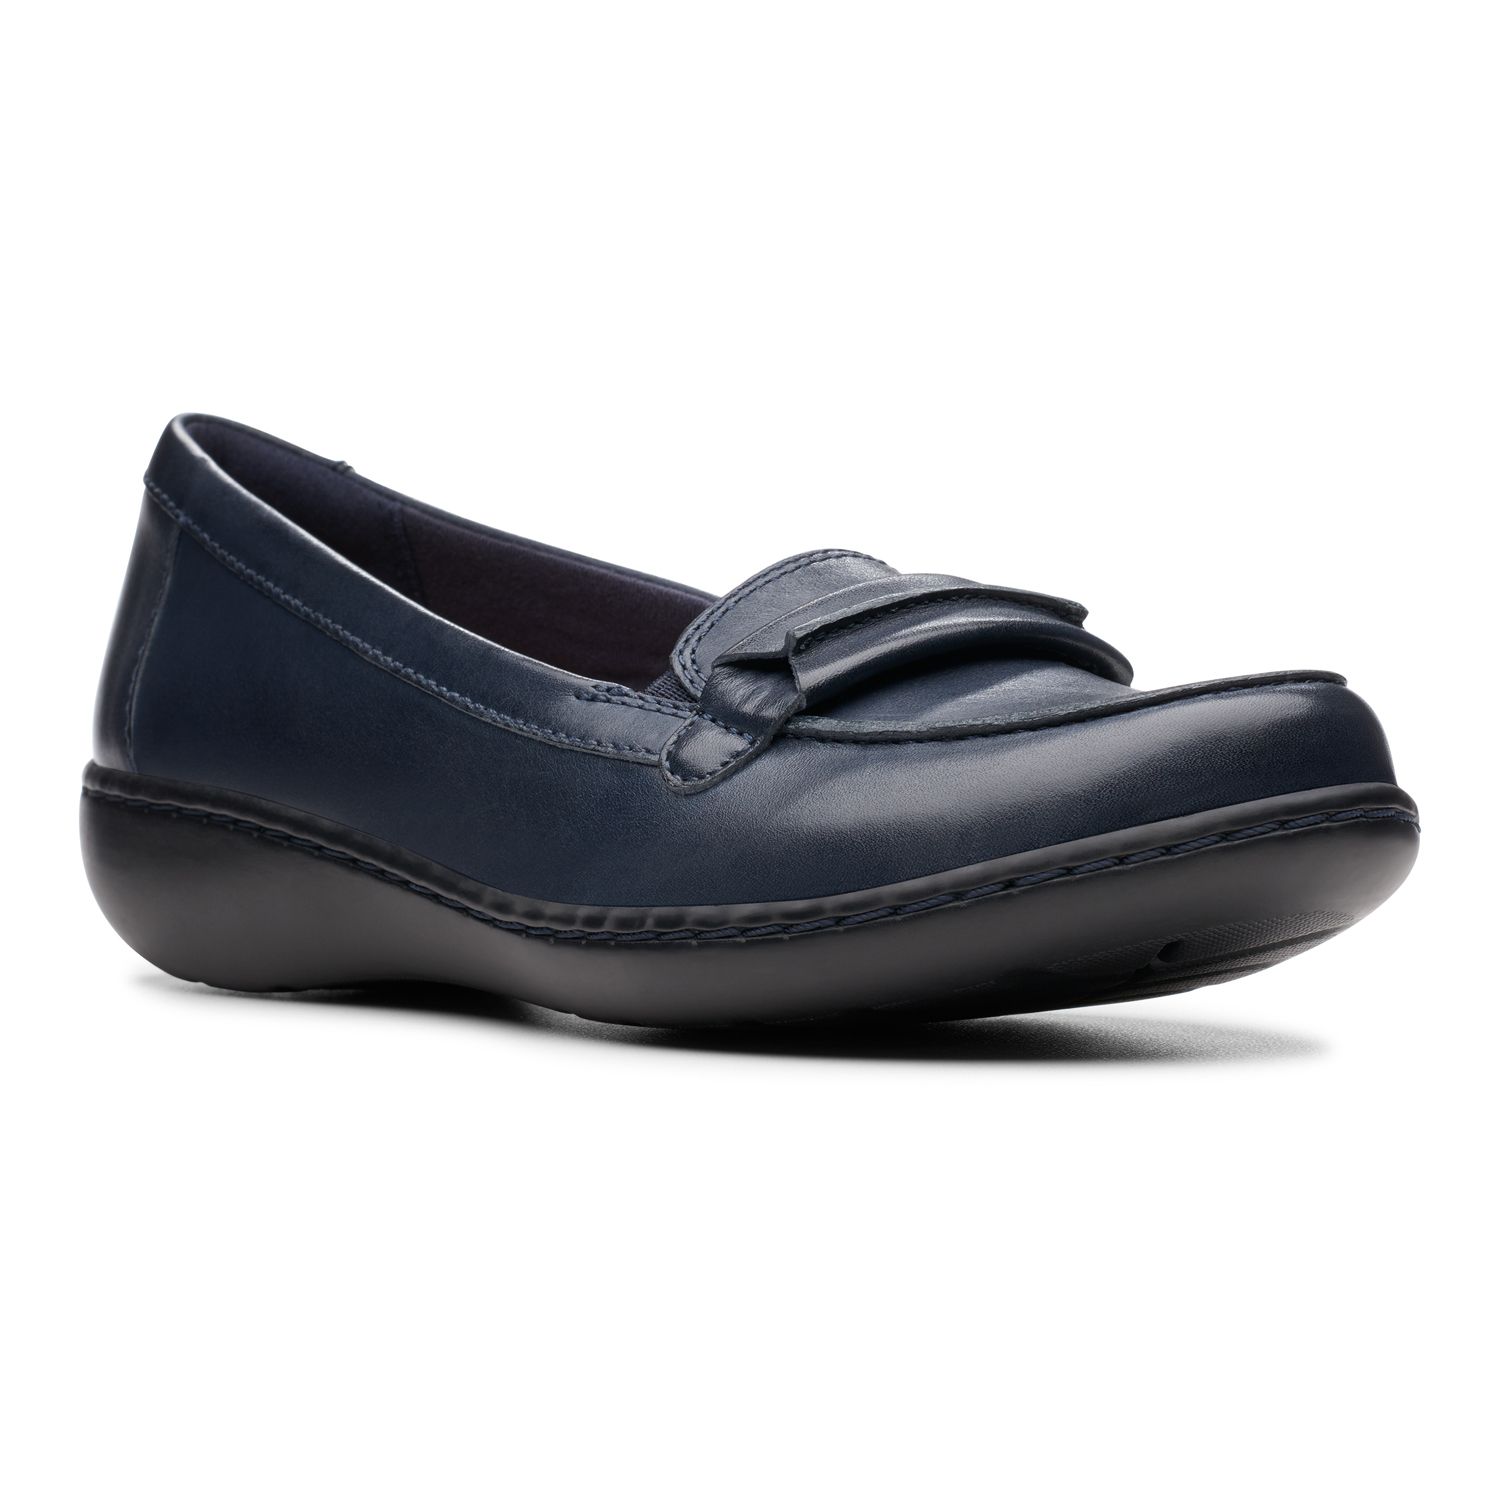 Clarks® Ashland Lily Women's Loafers